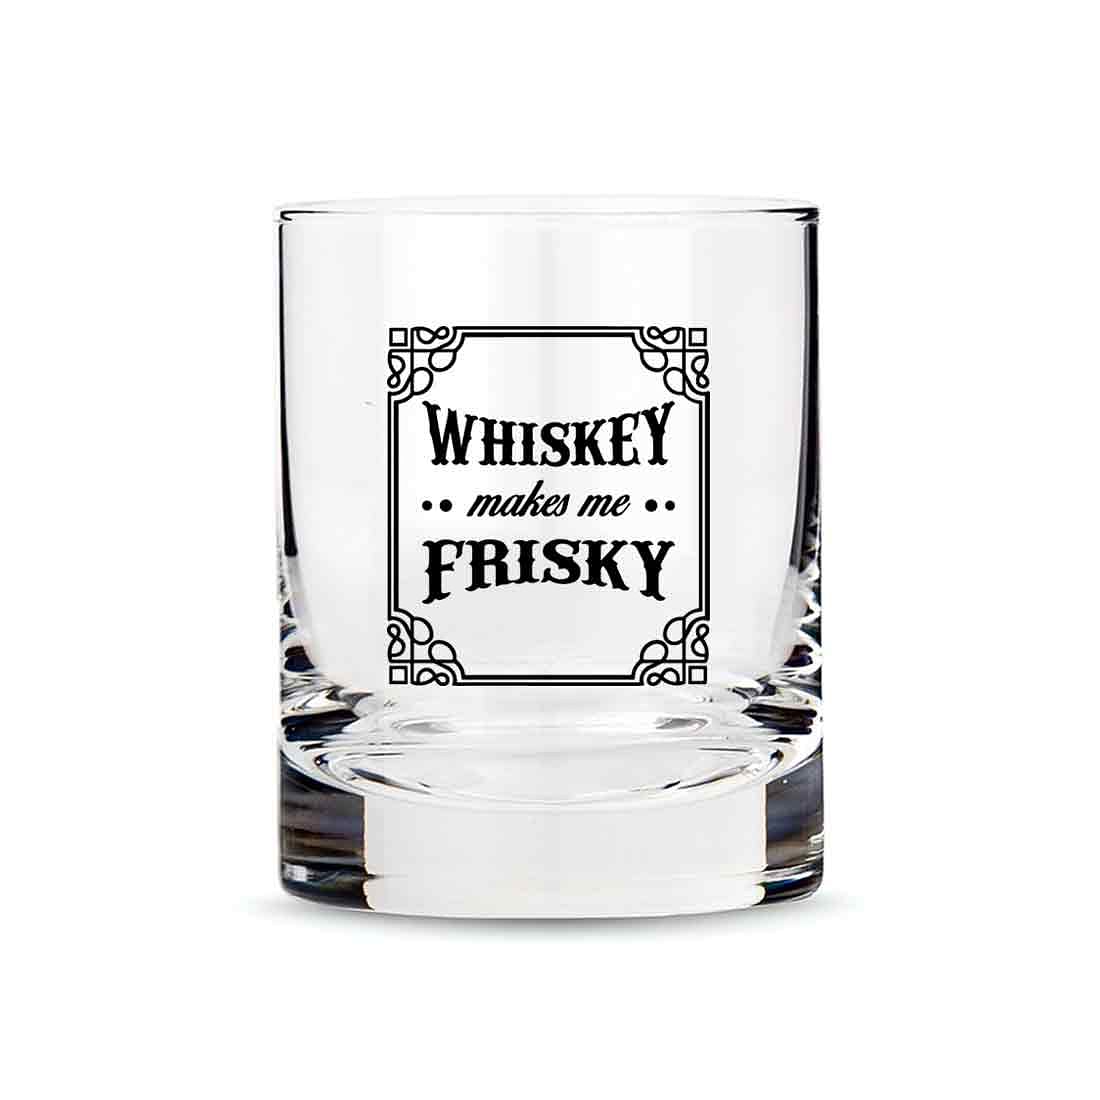 Whiskey Glasses Liquor Glass-  Anniversary Birthday Gift Funny Gifts for Husband Bf - WHISKY MAKES ME FRISKY Nutcase